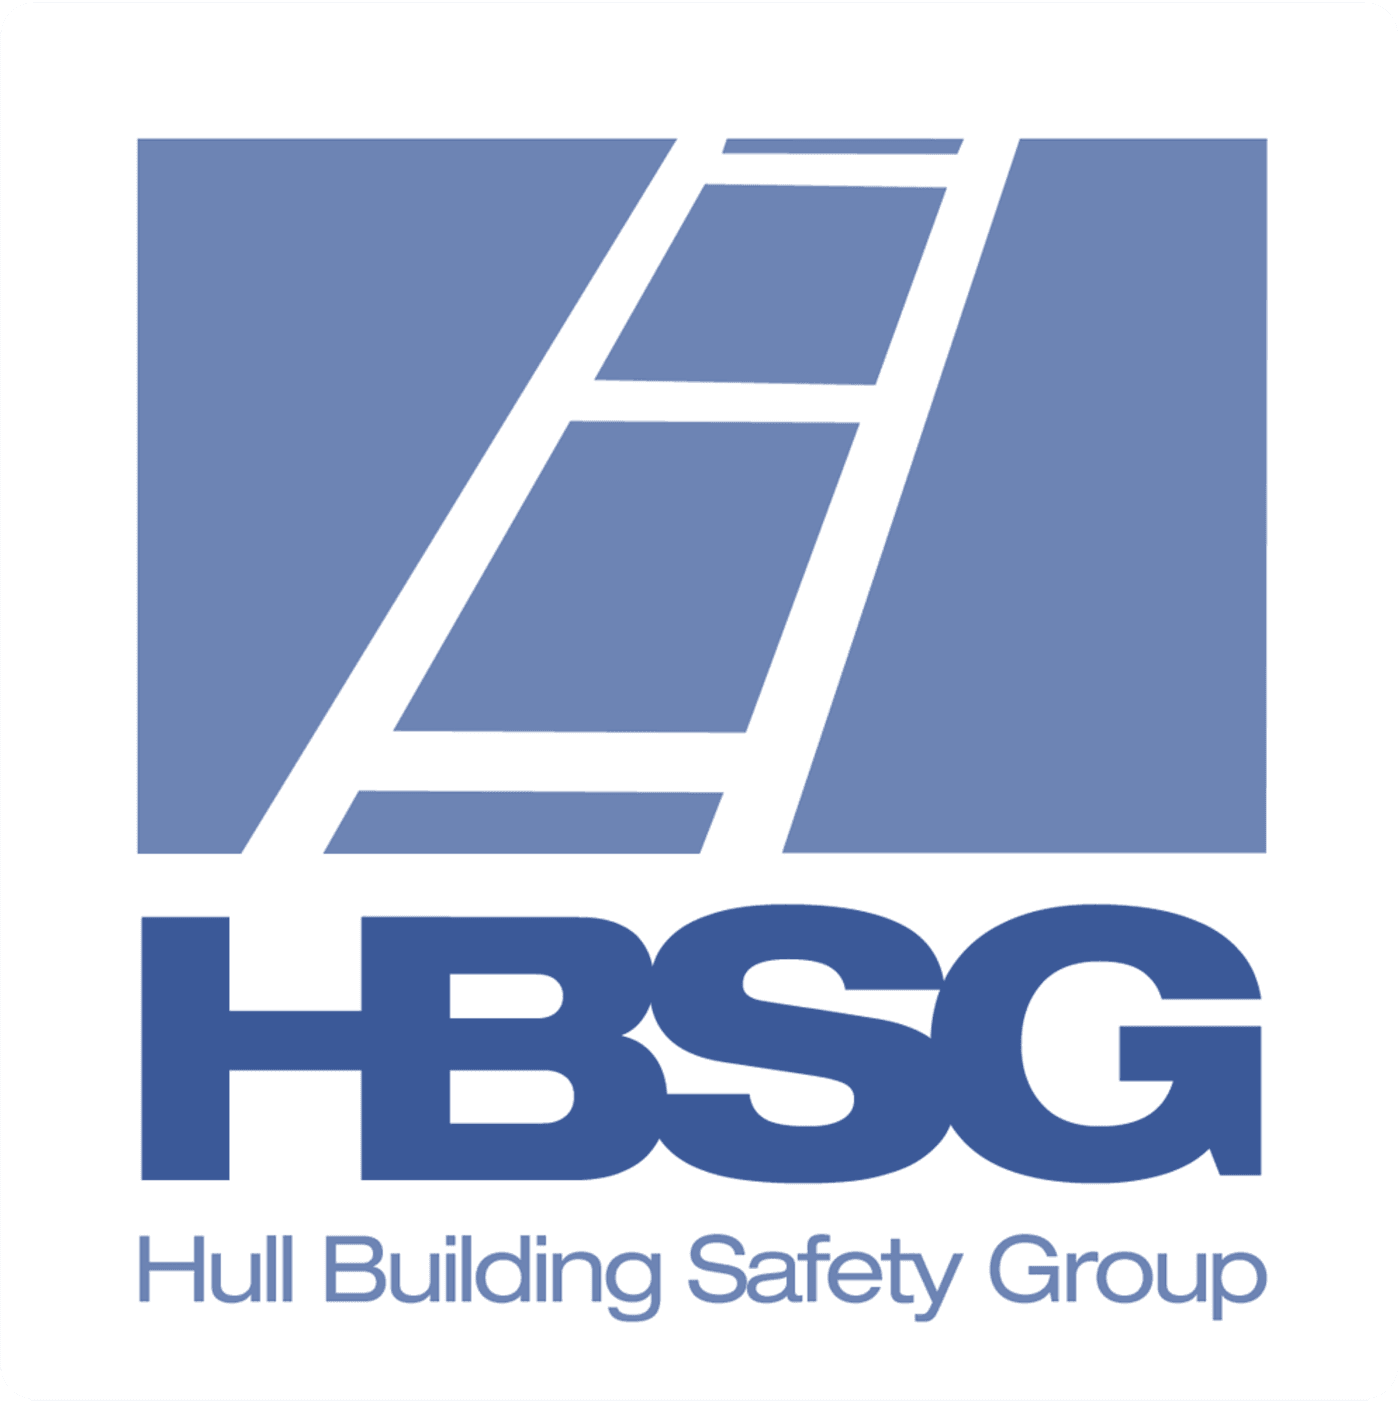 Hull Building Safety Group